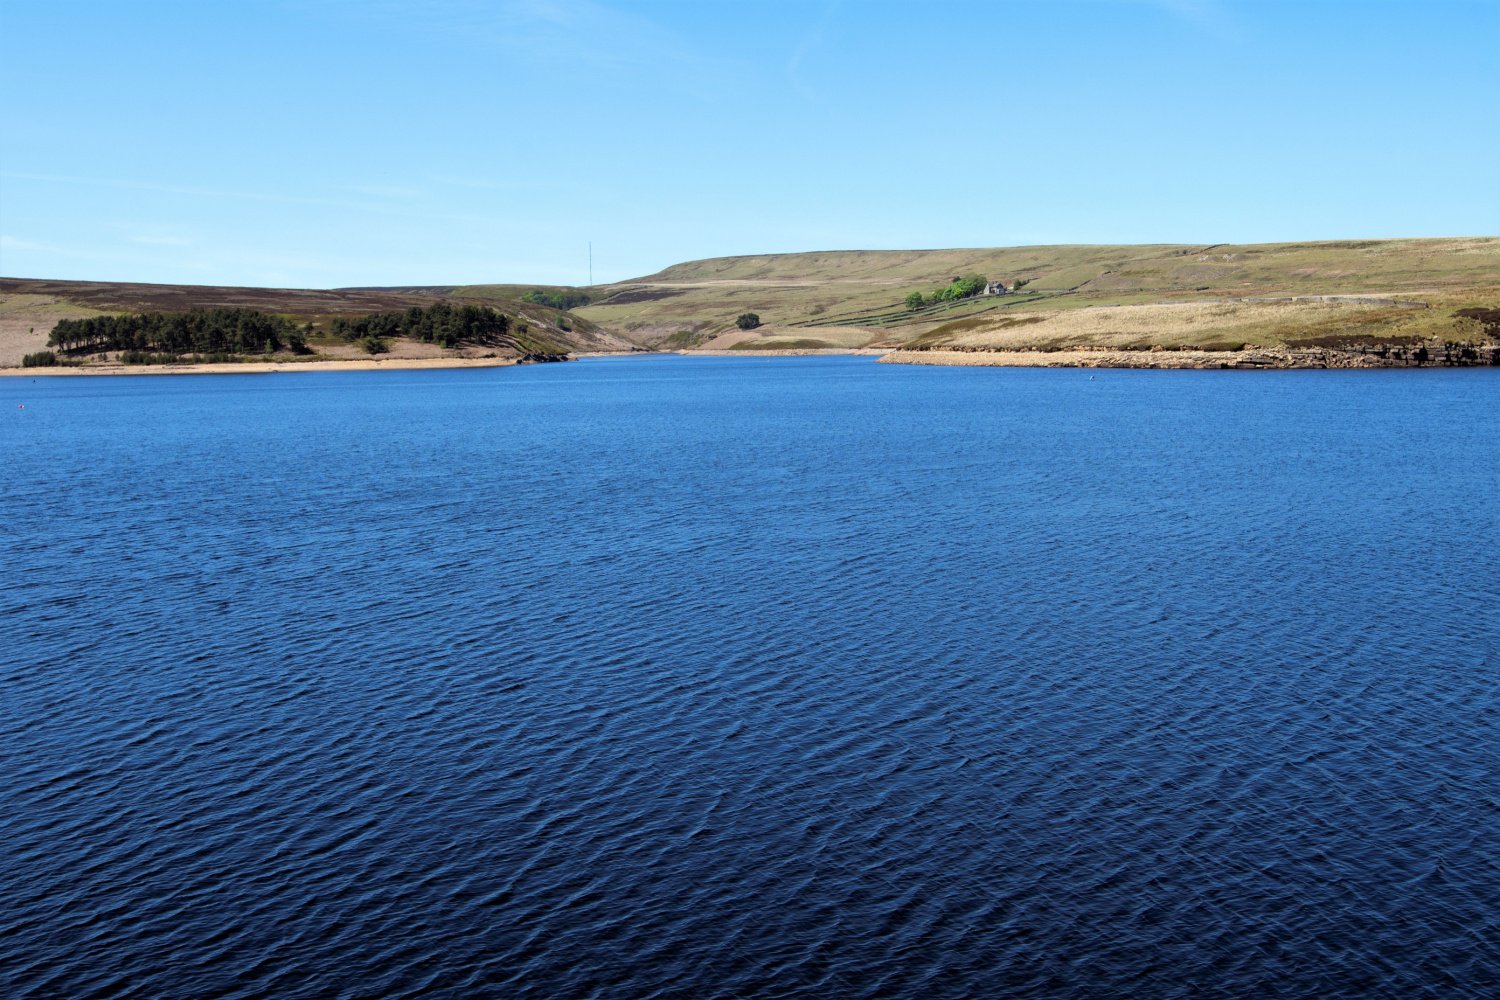 Image name winscar reservoir sheffield south yorkshire the 18 image from the post Walk: Winscar Reservoir in Yorkshire.com.